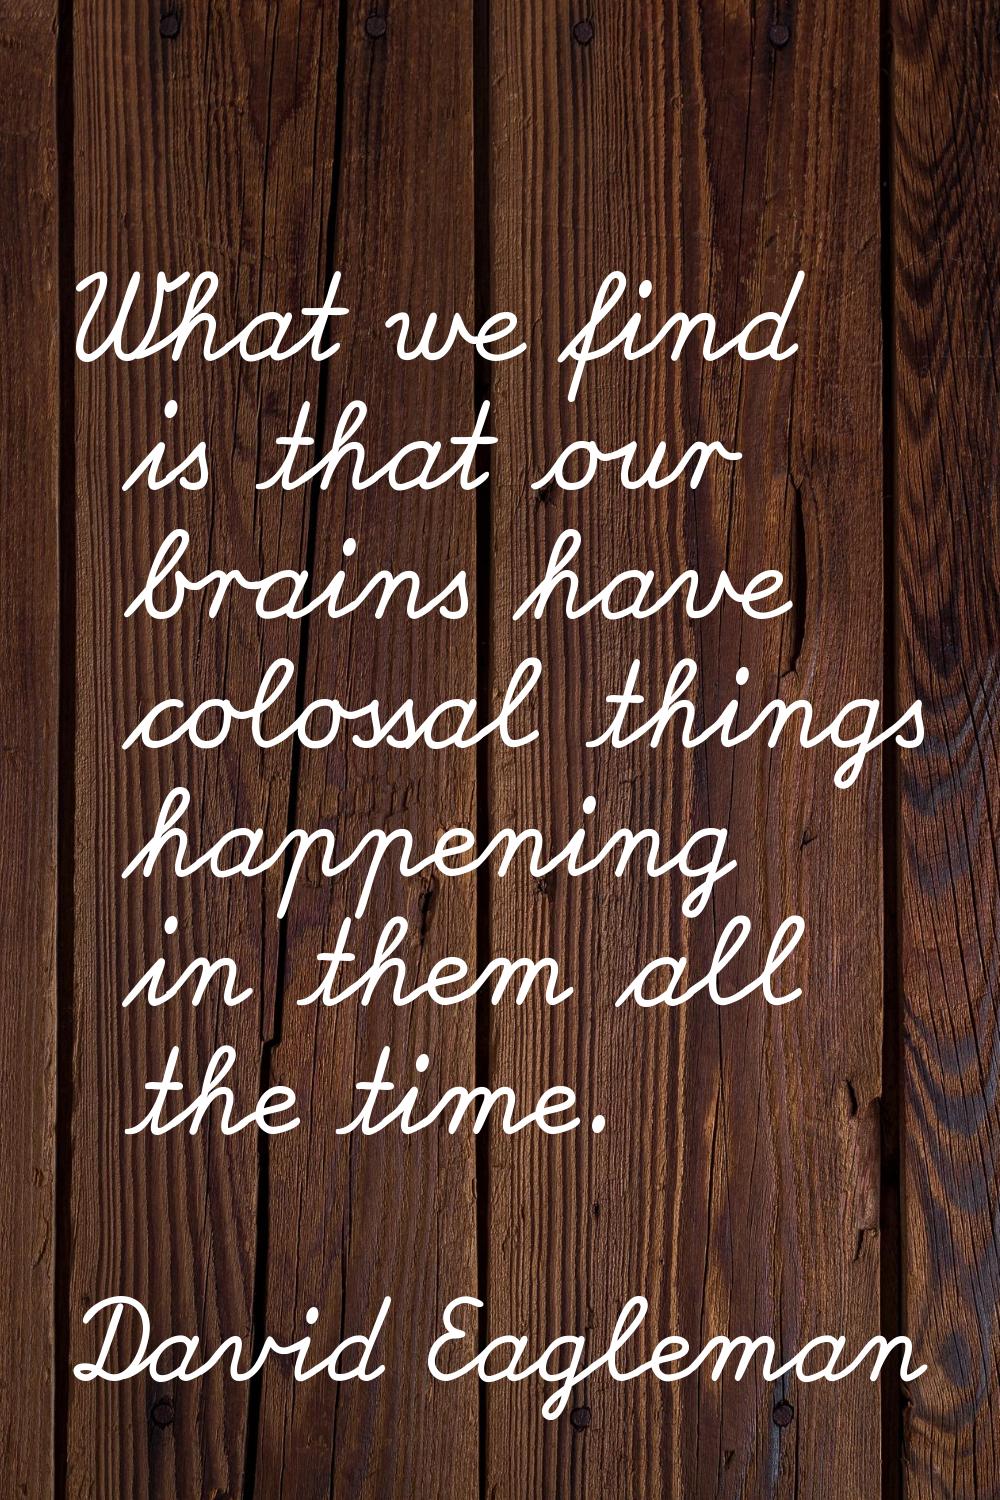 What we find is that our brains have colossal things happening in them all the time.